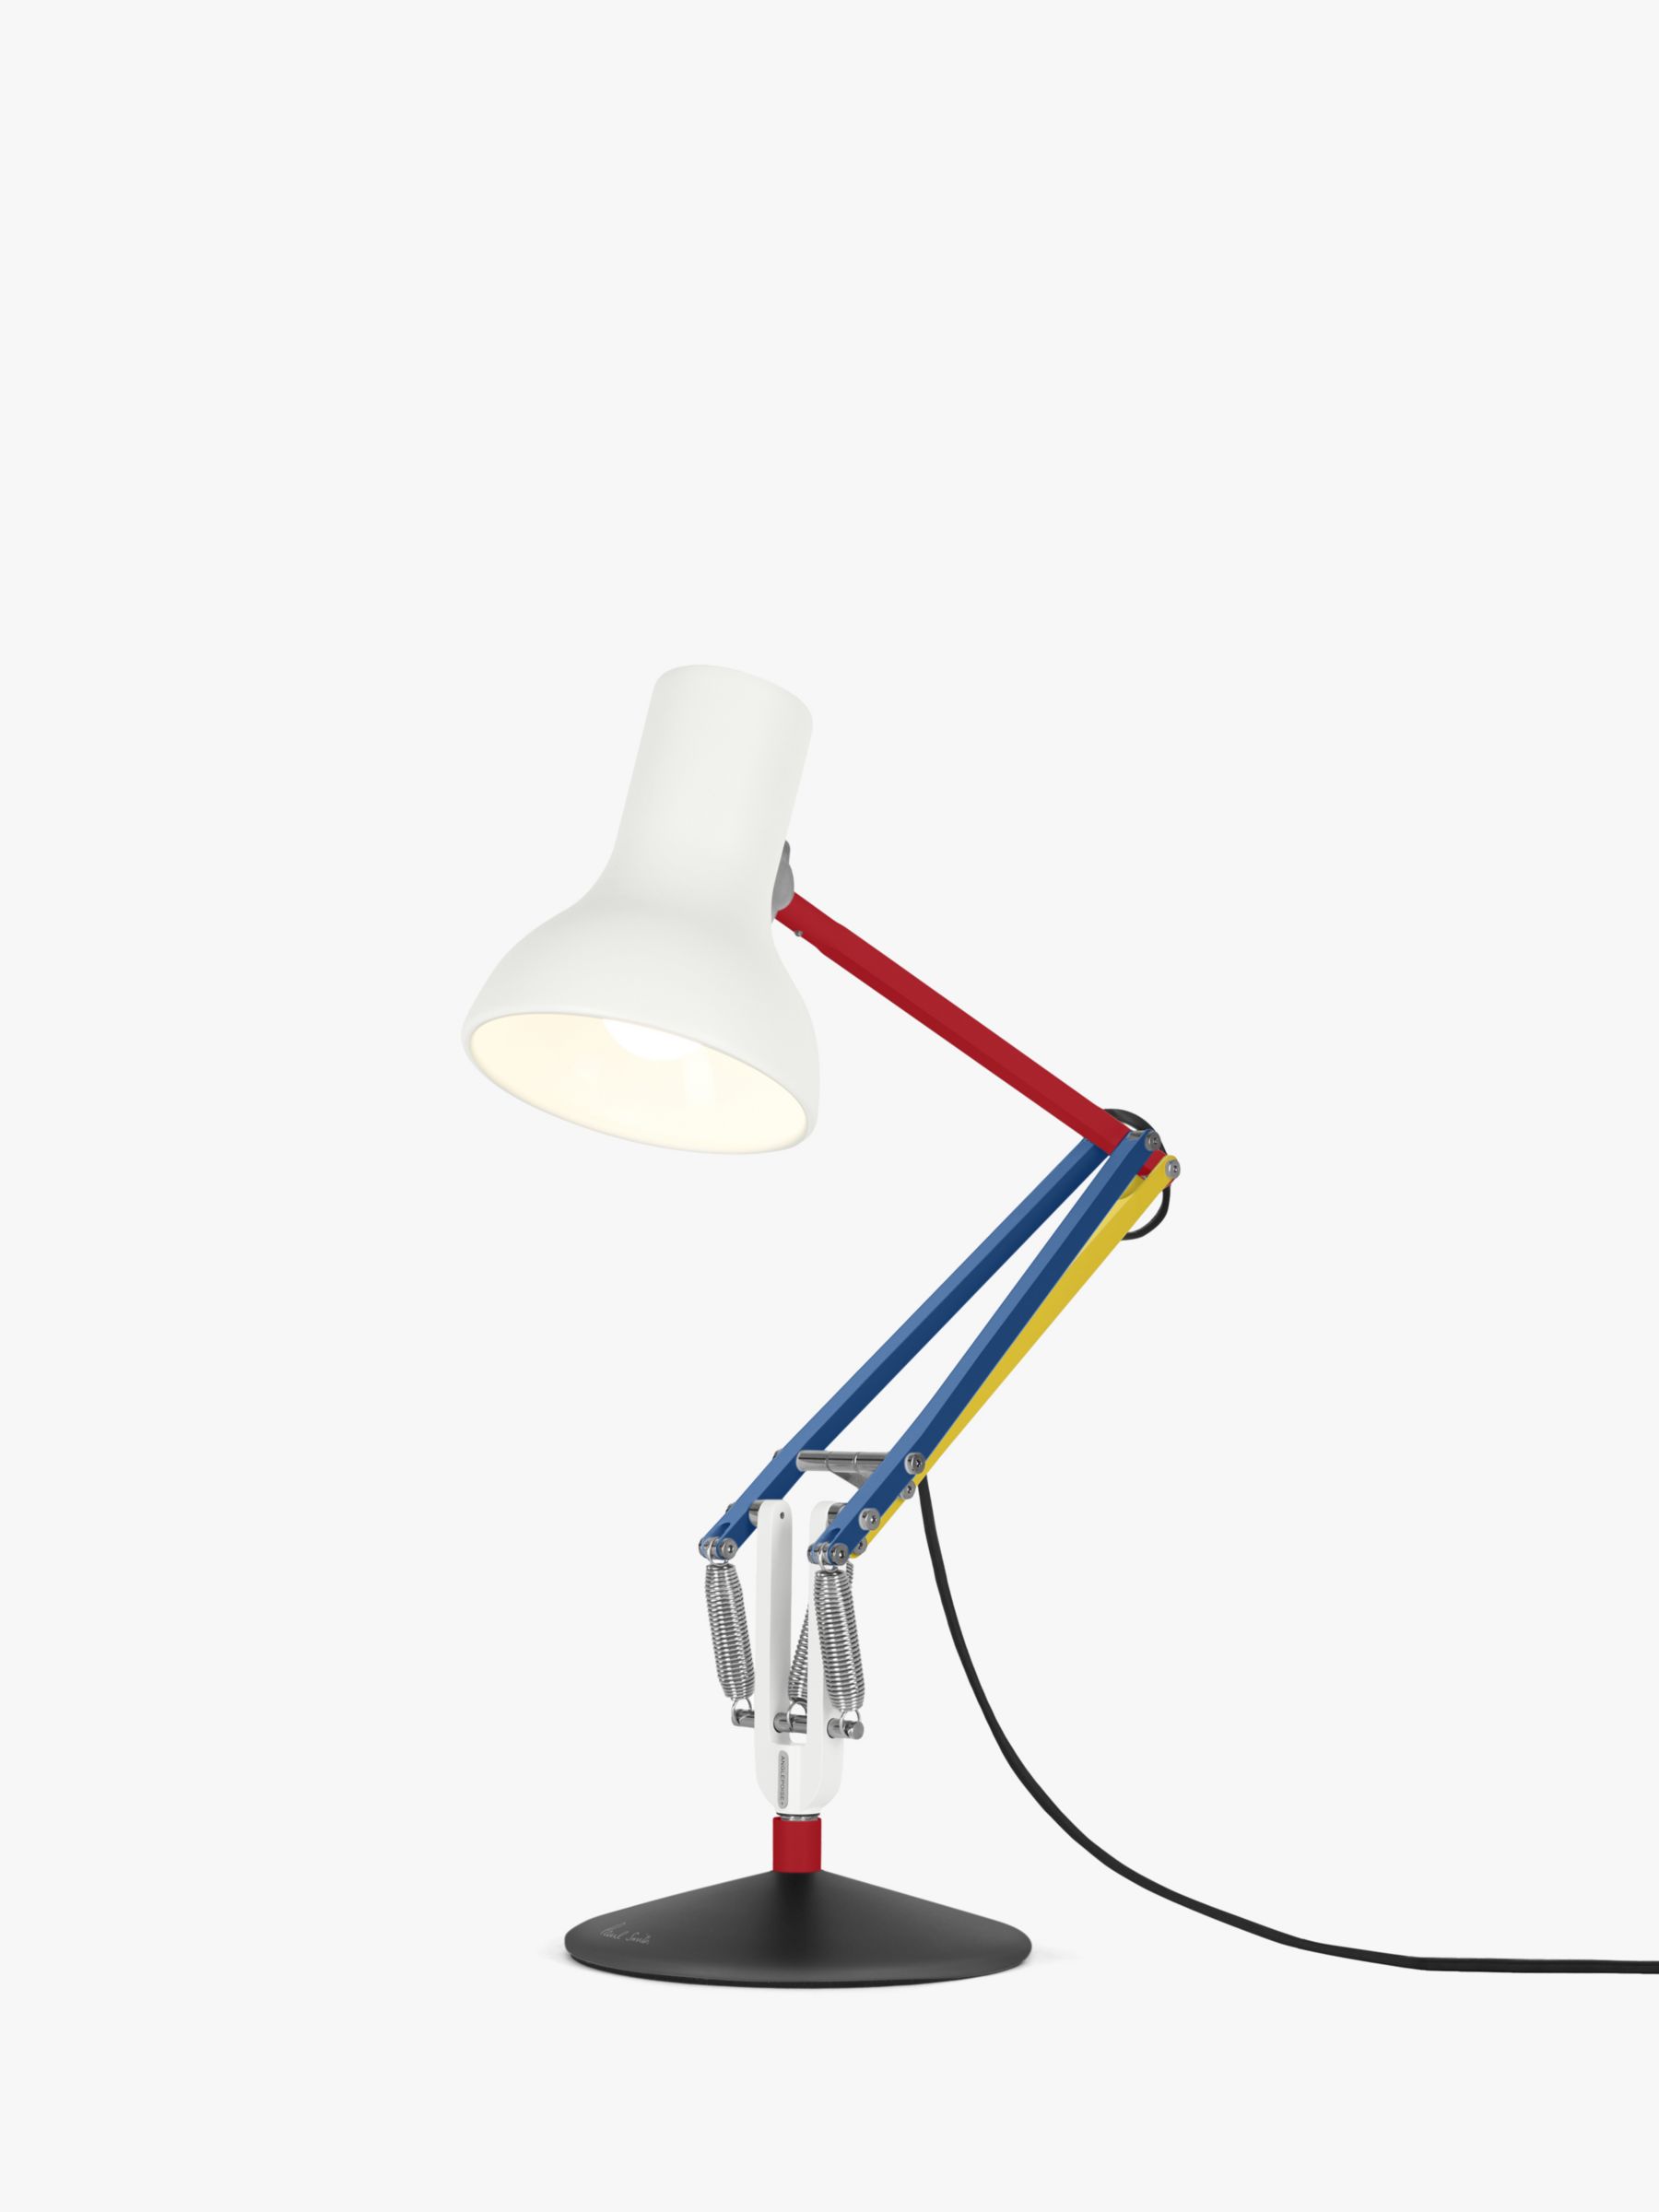 Anglepoise + Paul Smith Type 75 Mini Desk Lamp, Edition 3 at John Lewis & Partners